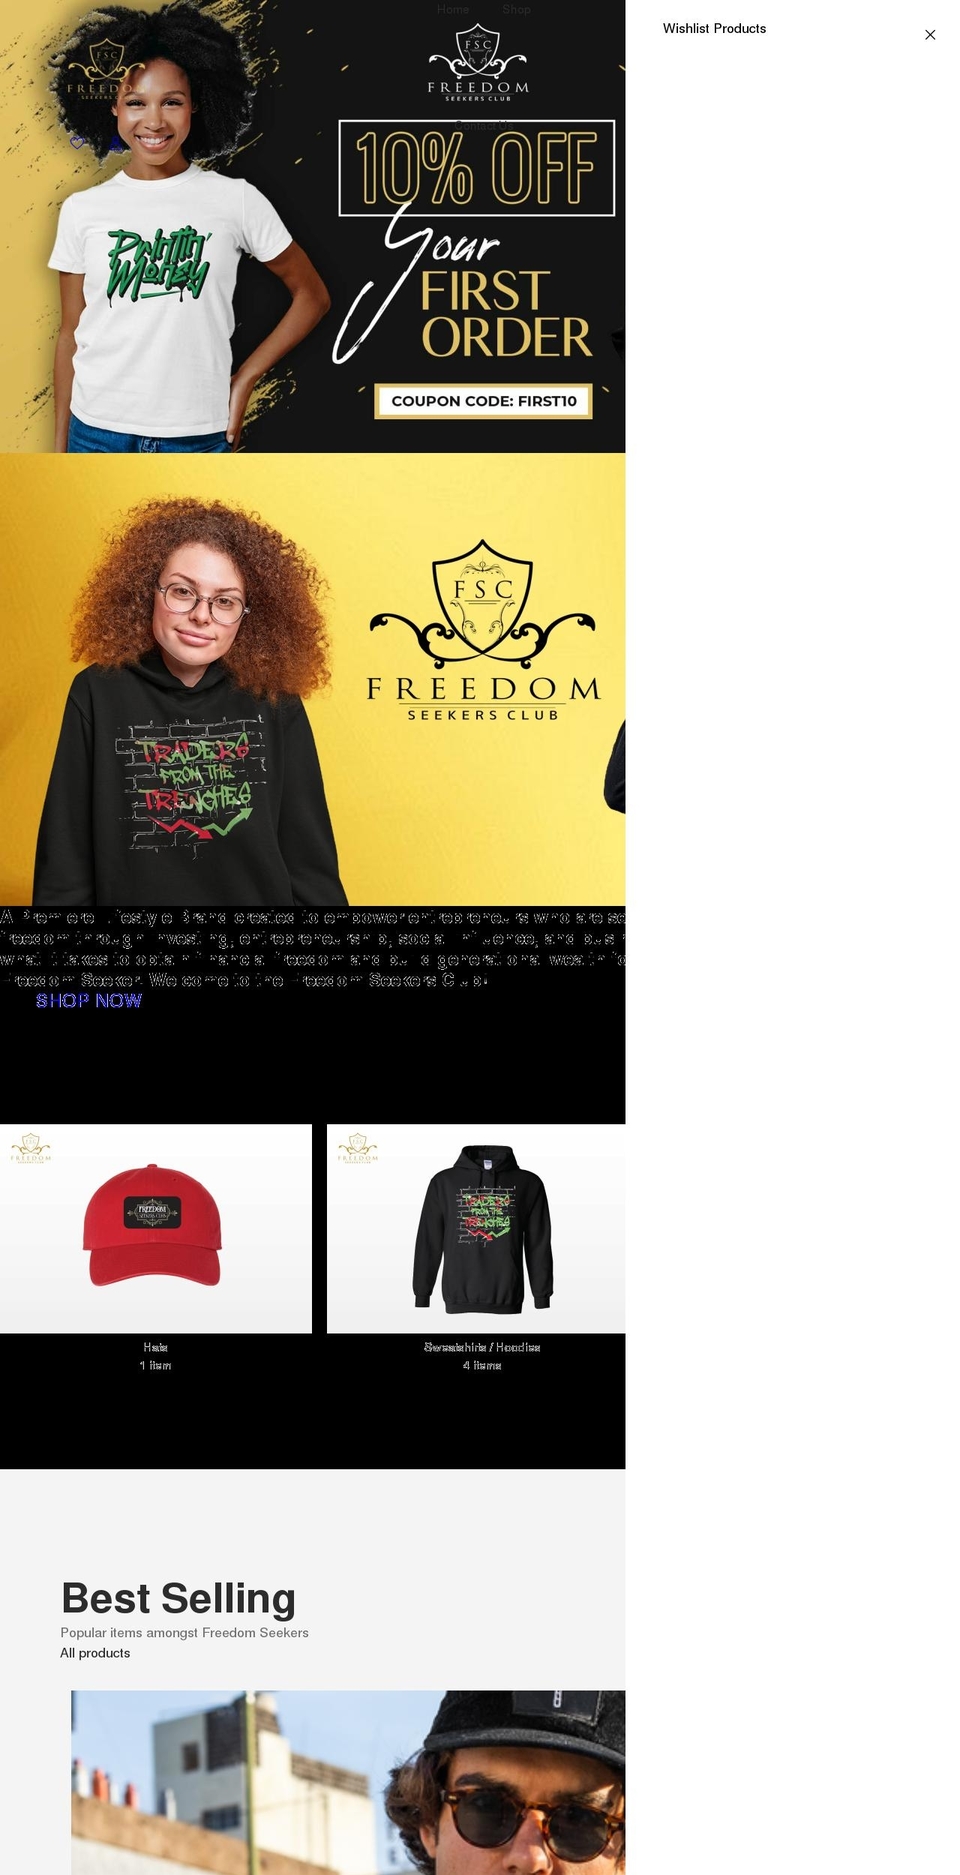 Lusion Shopify theme site example freedomseekersclub.com